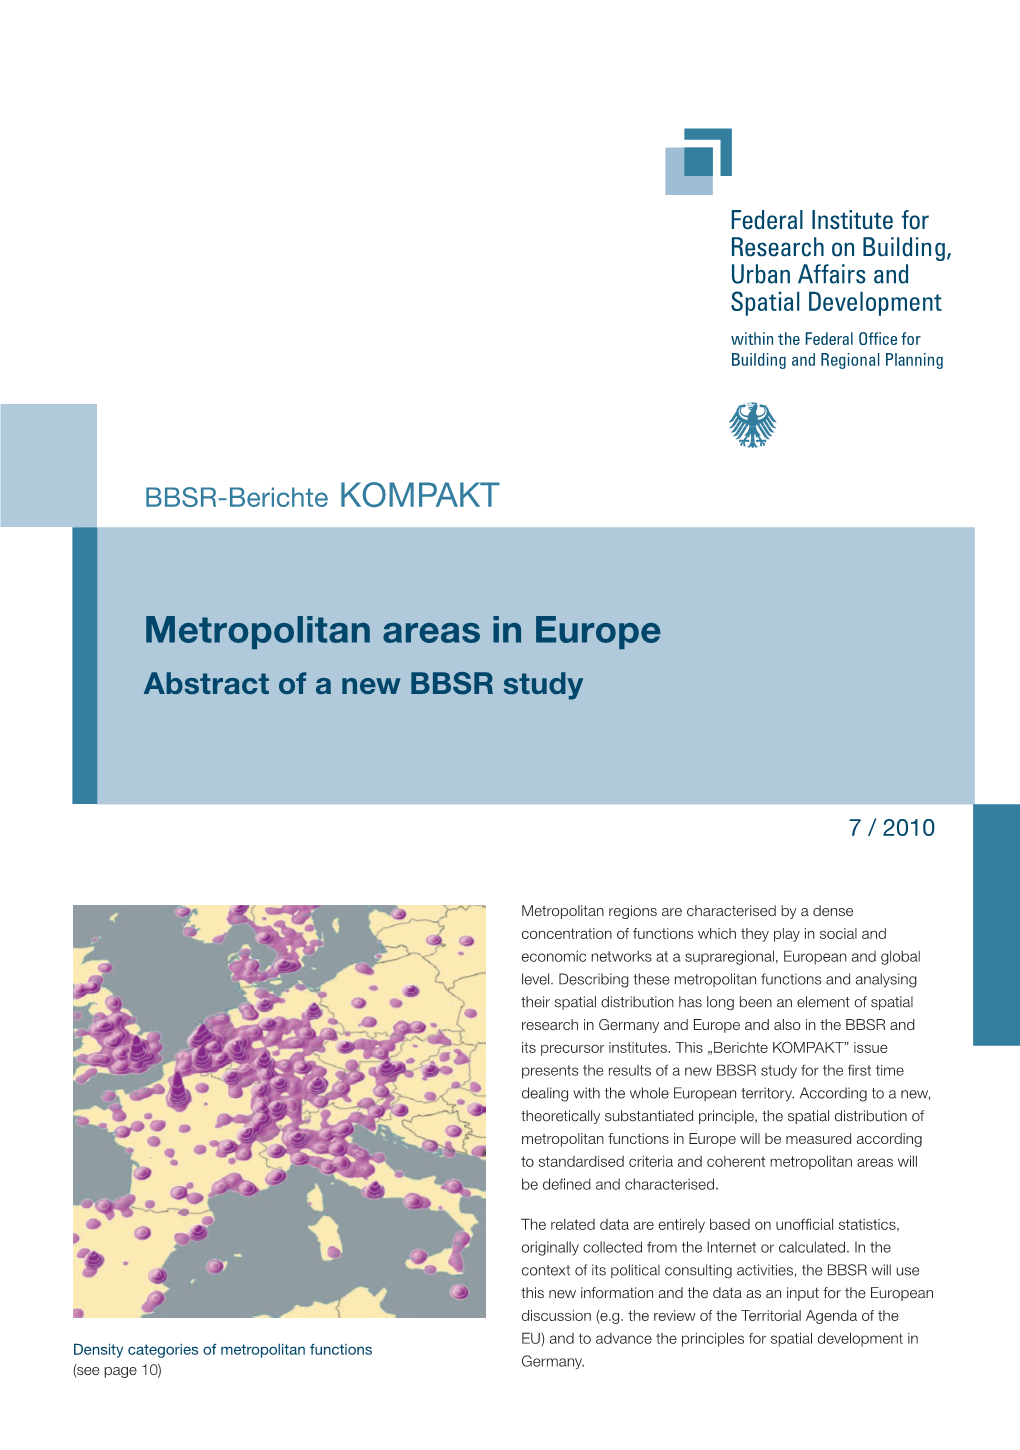 Metropolitan Areas in Europe Abstract of a New BBSR Study